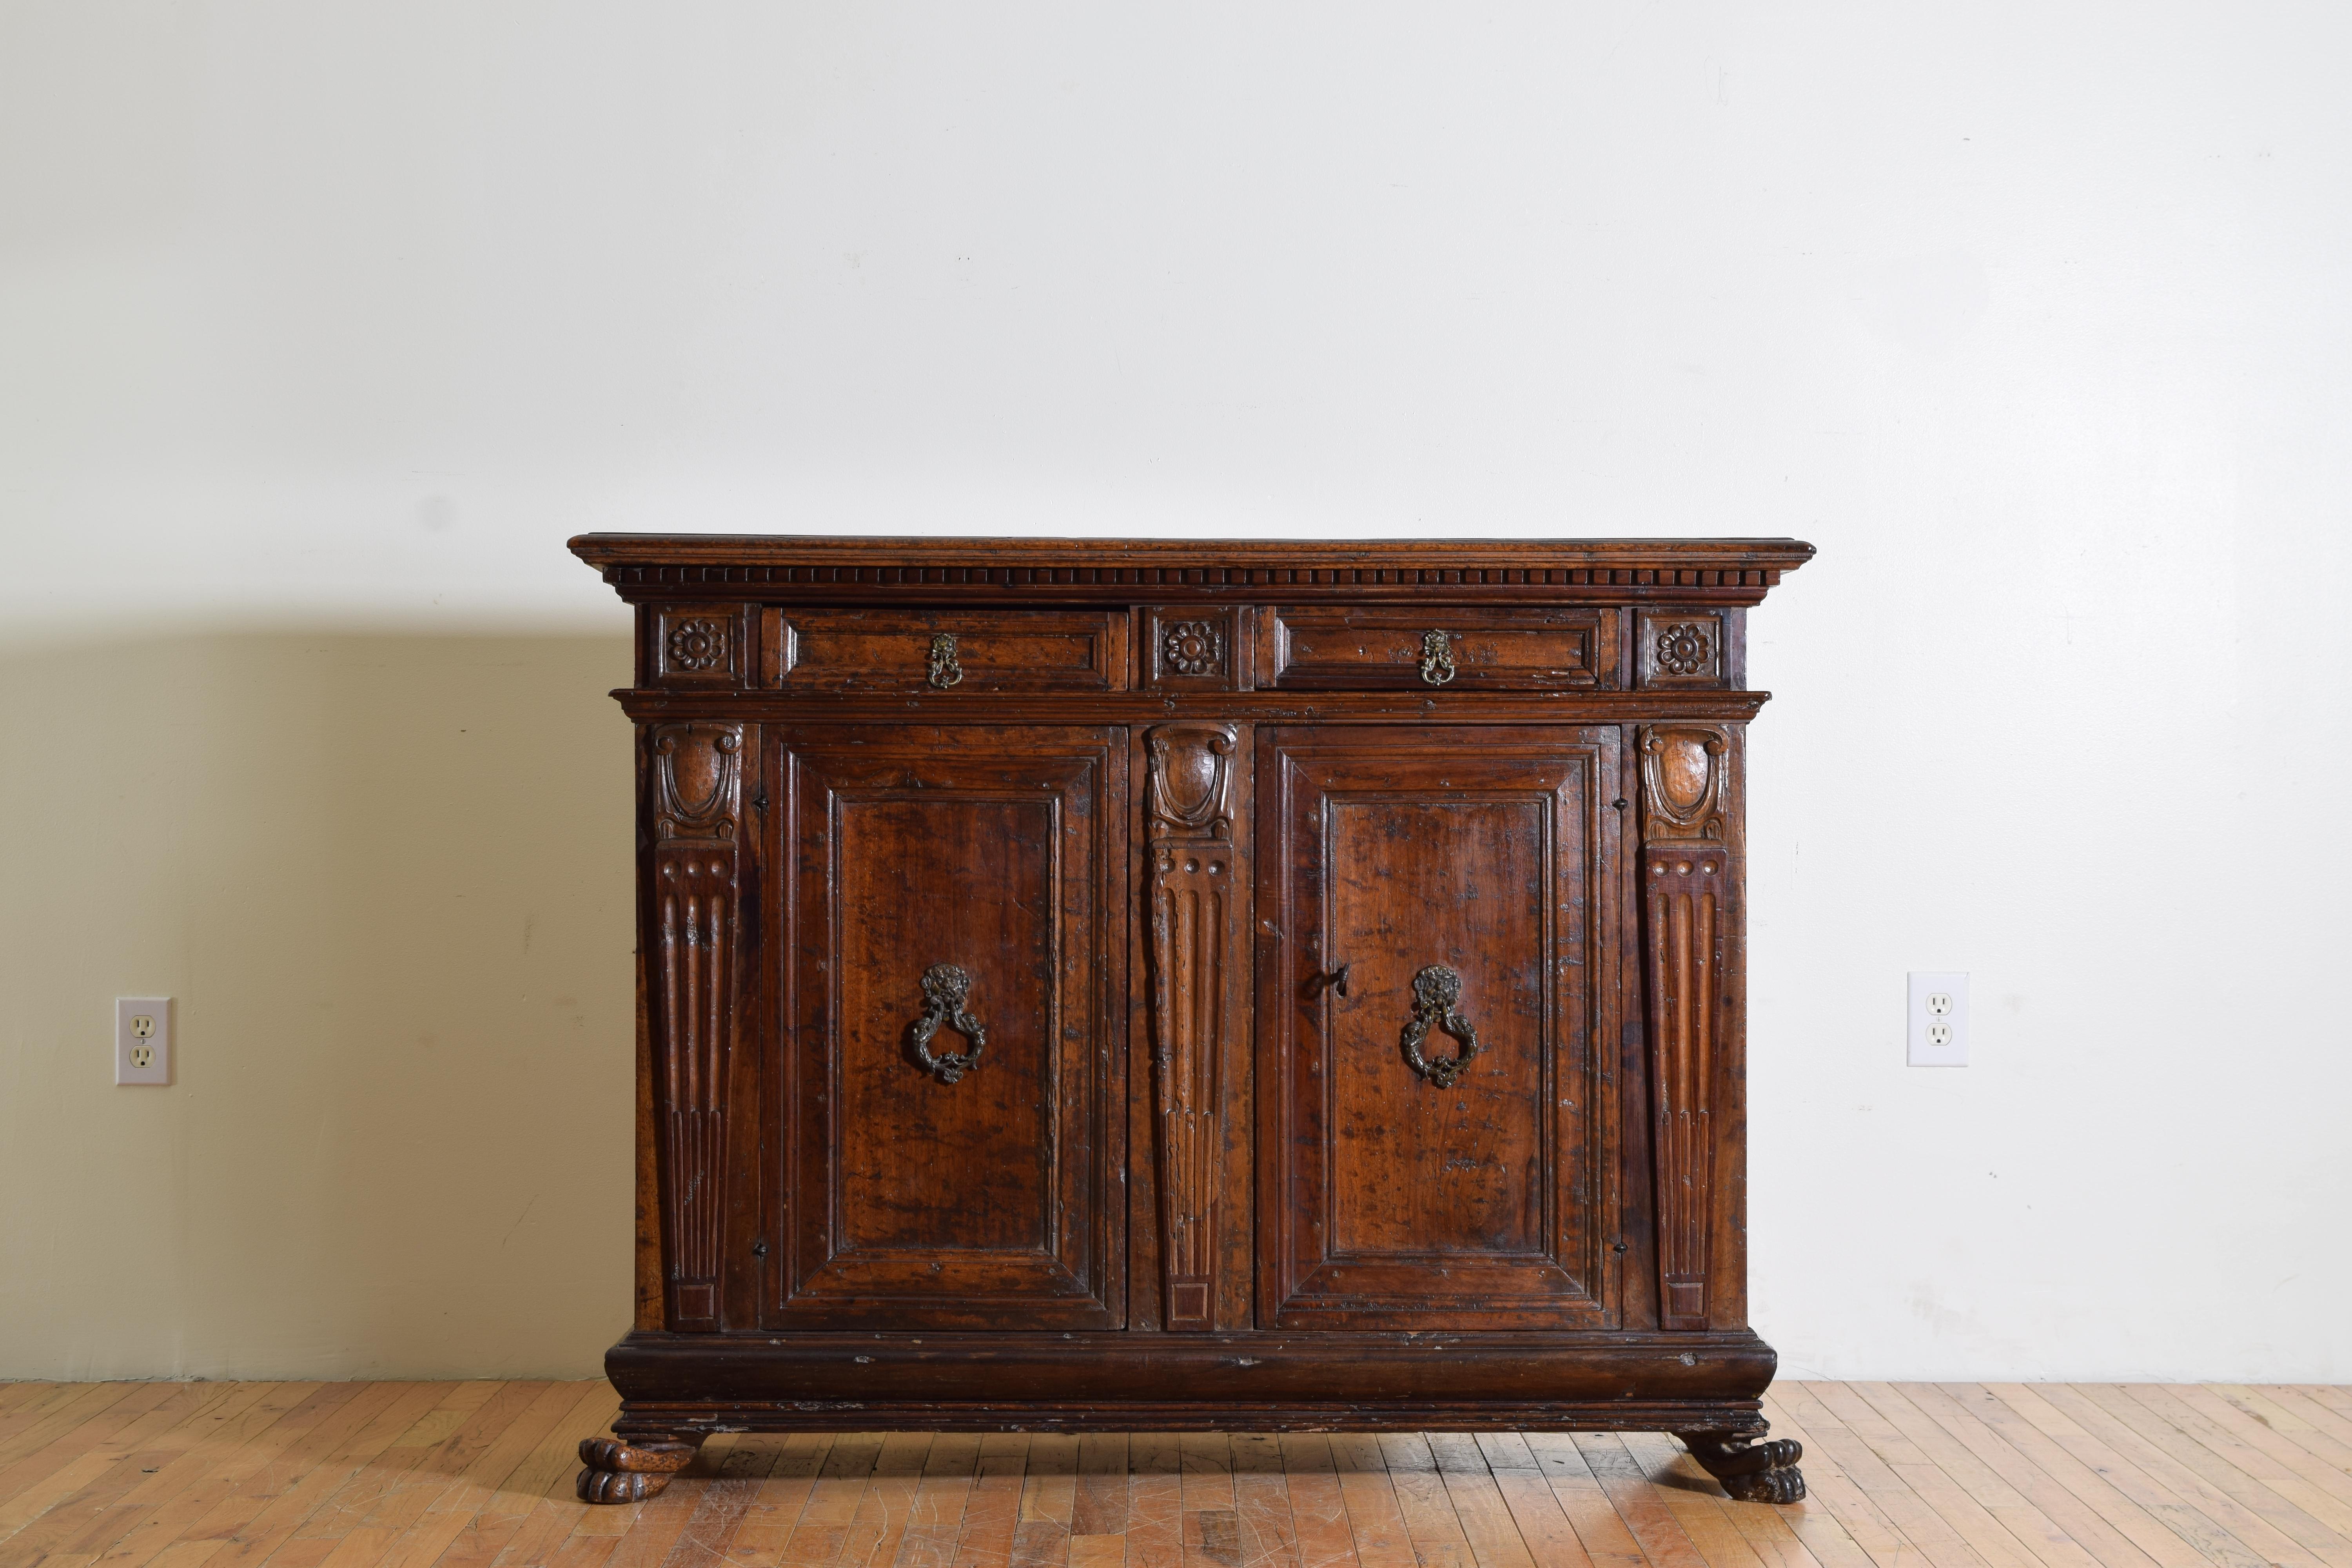 Having a rectangular top with molded and rounded edge with dentile molding below atop a conforming case with two paneled drawers between three framed and carved rosettes, the two paneled doors between three fluted pilasters with carved ornaments